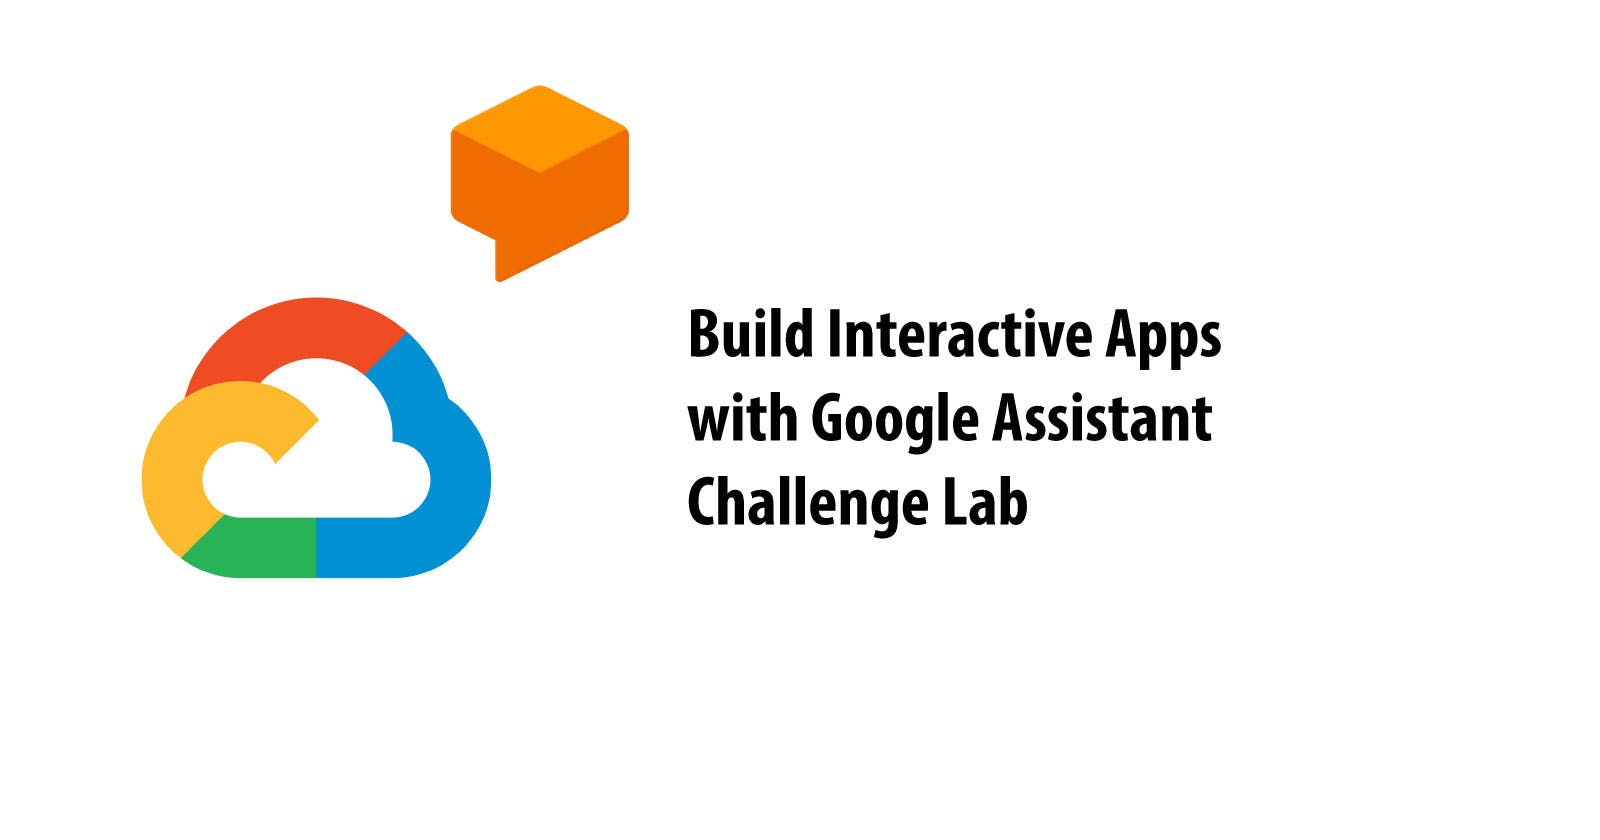 Build Interactive Apps with Google Assistant: Challenge Lab